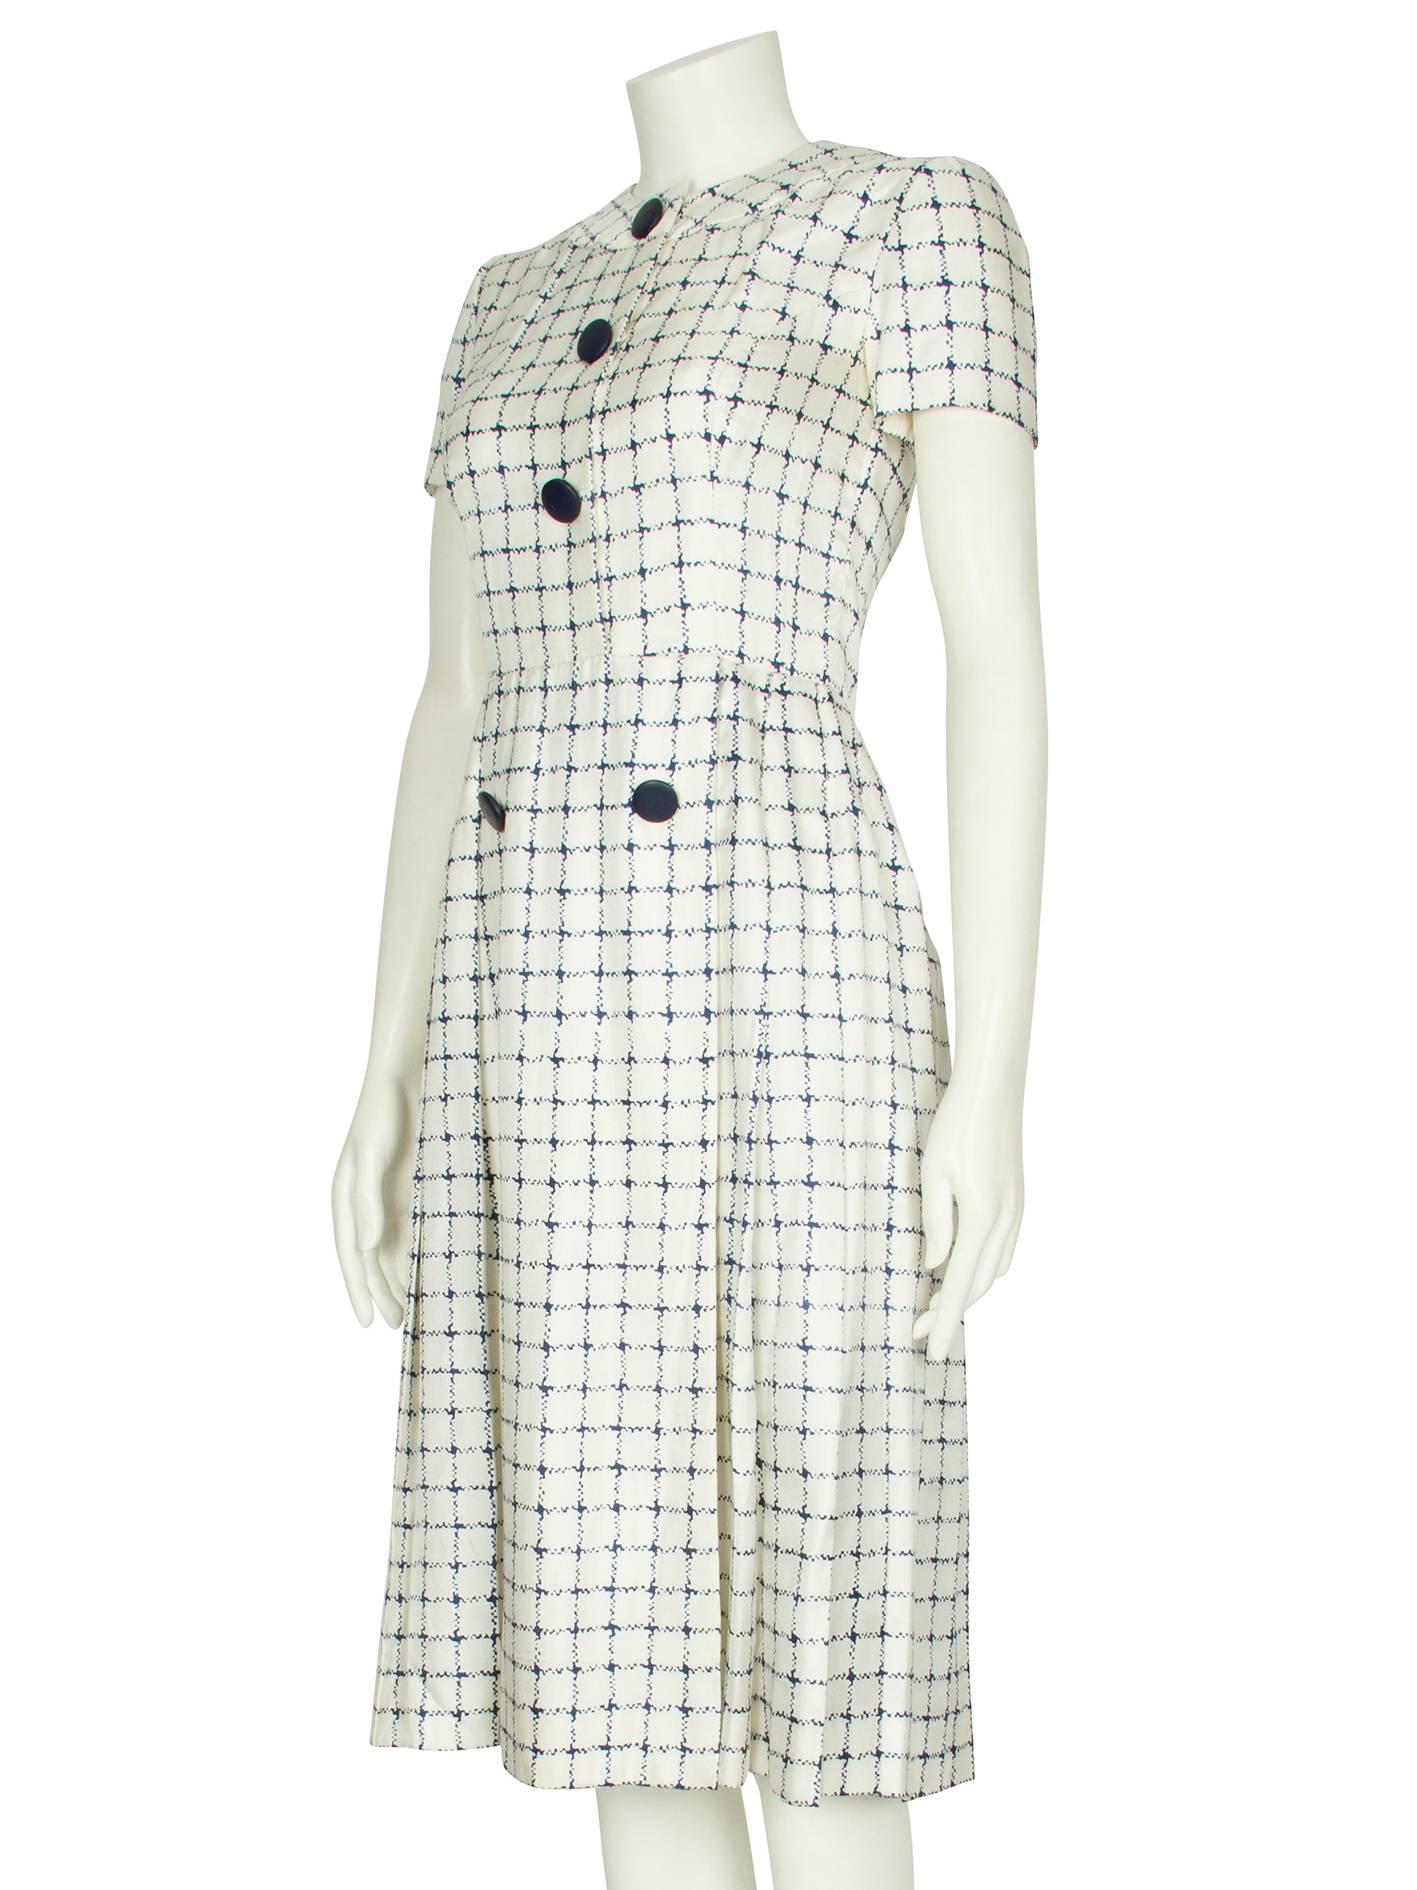 A short-sleeved ivory silk day dress by London society couturier Harald which features an all-over navy blue checked print and oversized navy blue buttons. The soft, lightweight dress is straight cut to the waist and features a round neckline with a